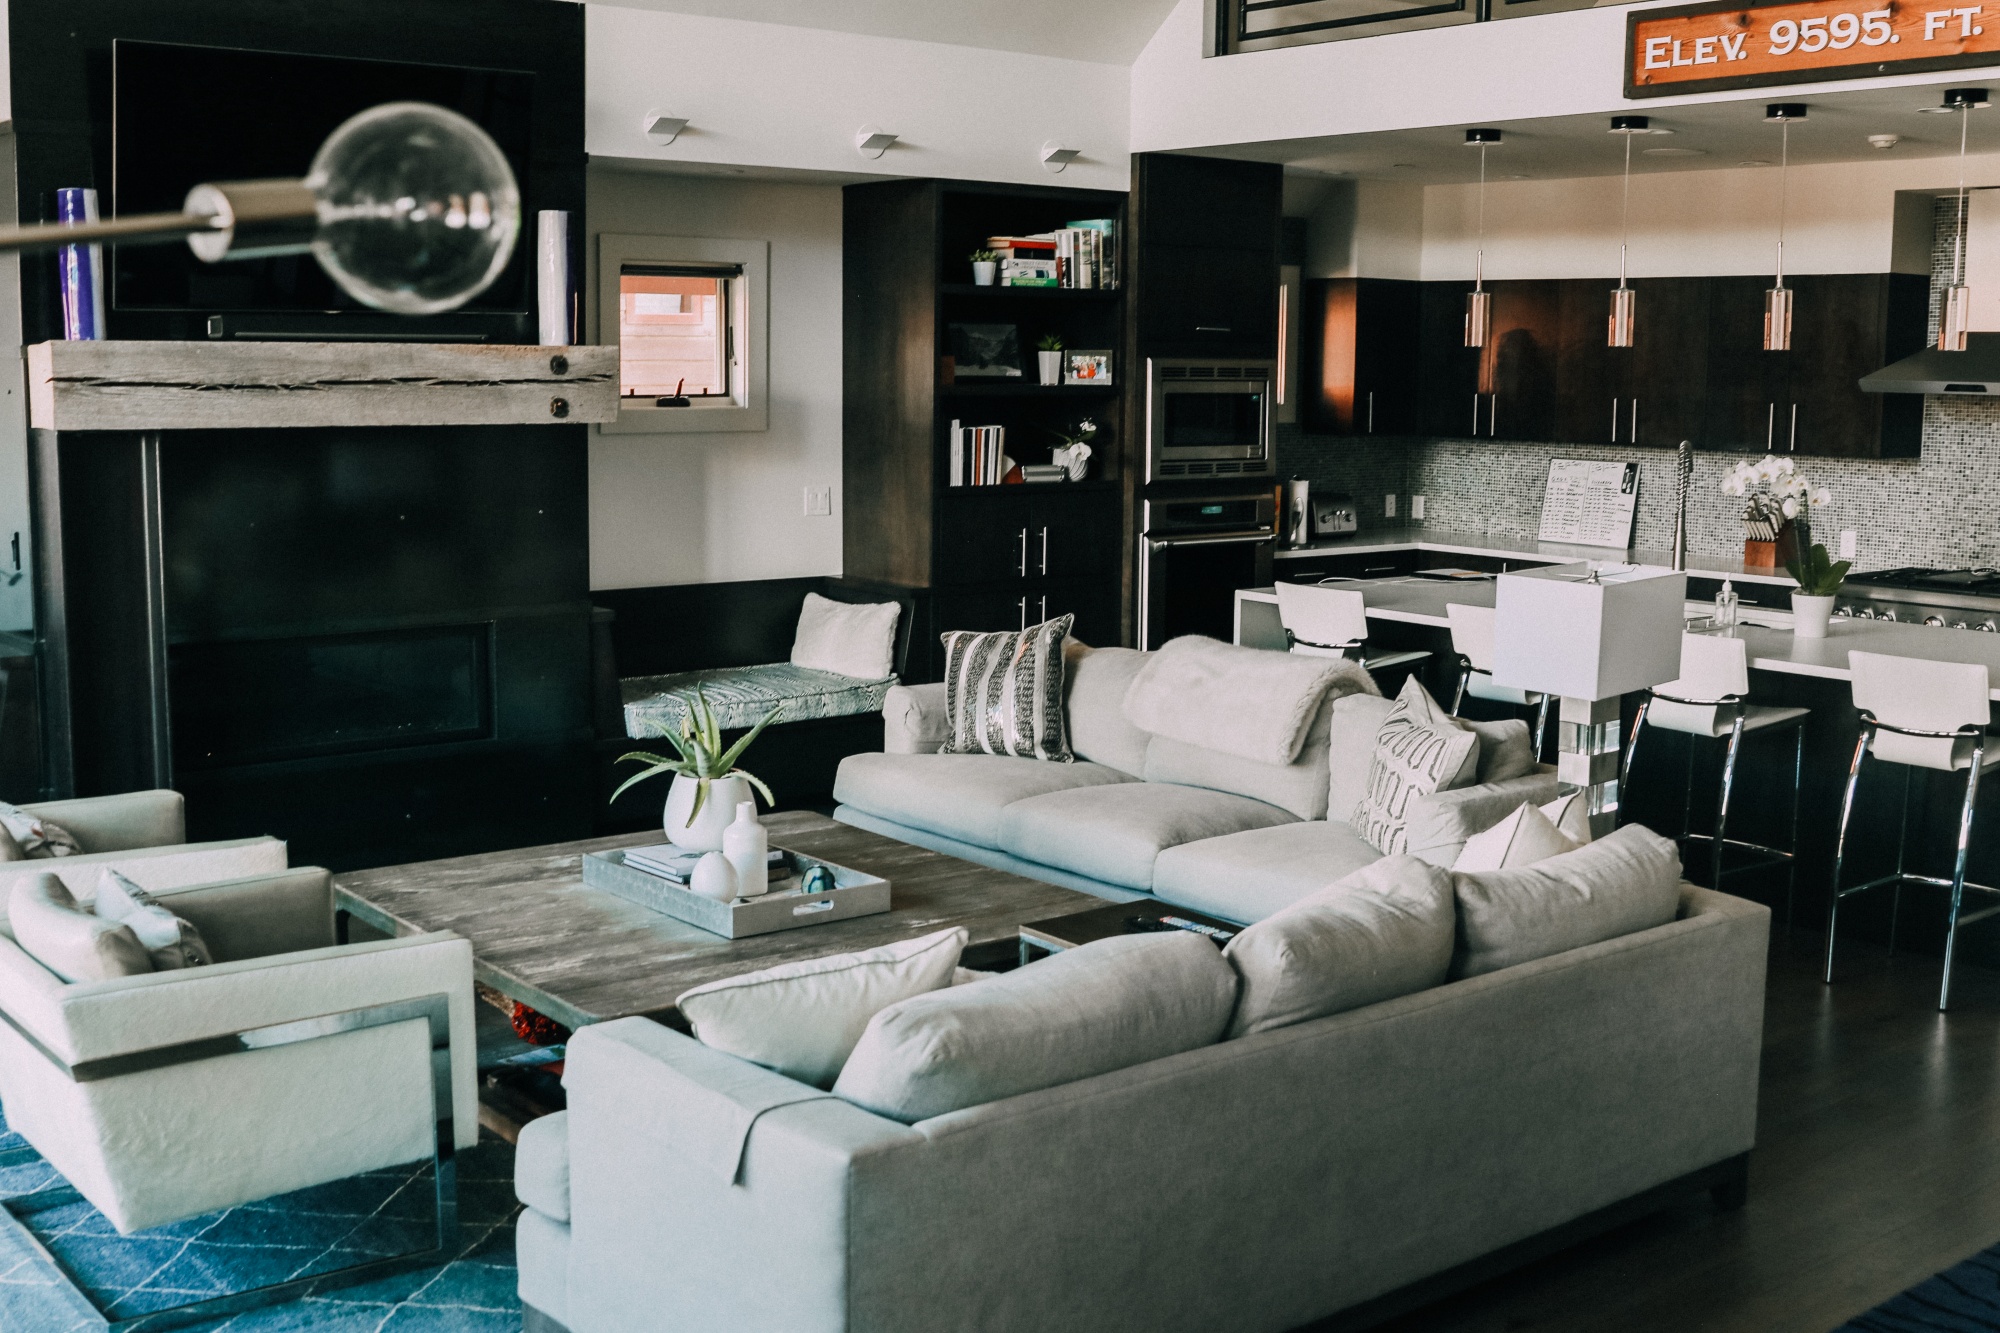 How To Make A Modern Home Cozy, Fashion blogger Erin Busbee of Busbee Style sharing her modern mountain home in Telluride, Colorado and how to make it cozy with pillows, personal touches, comfortable seating, house plants, and more!